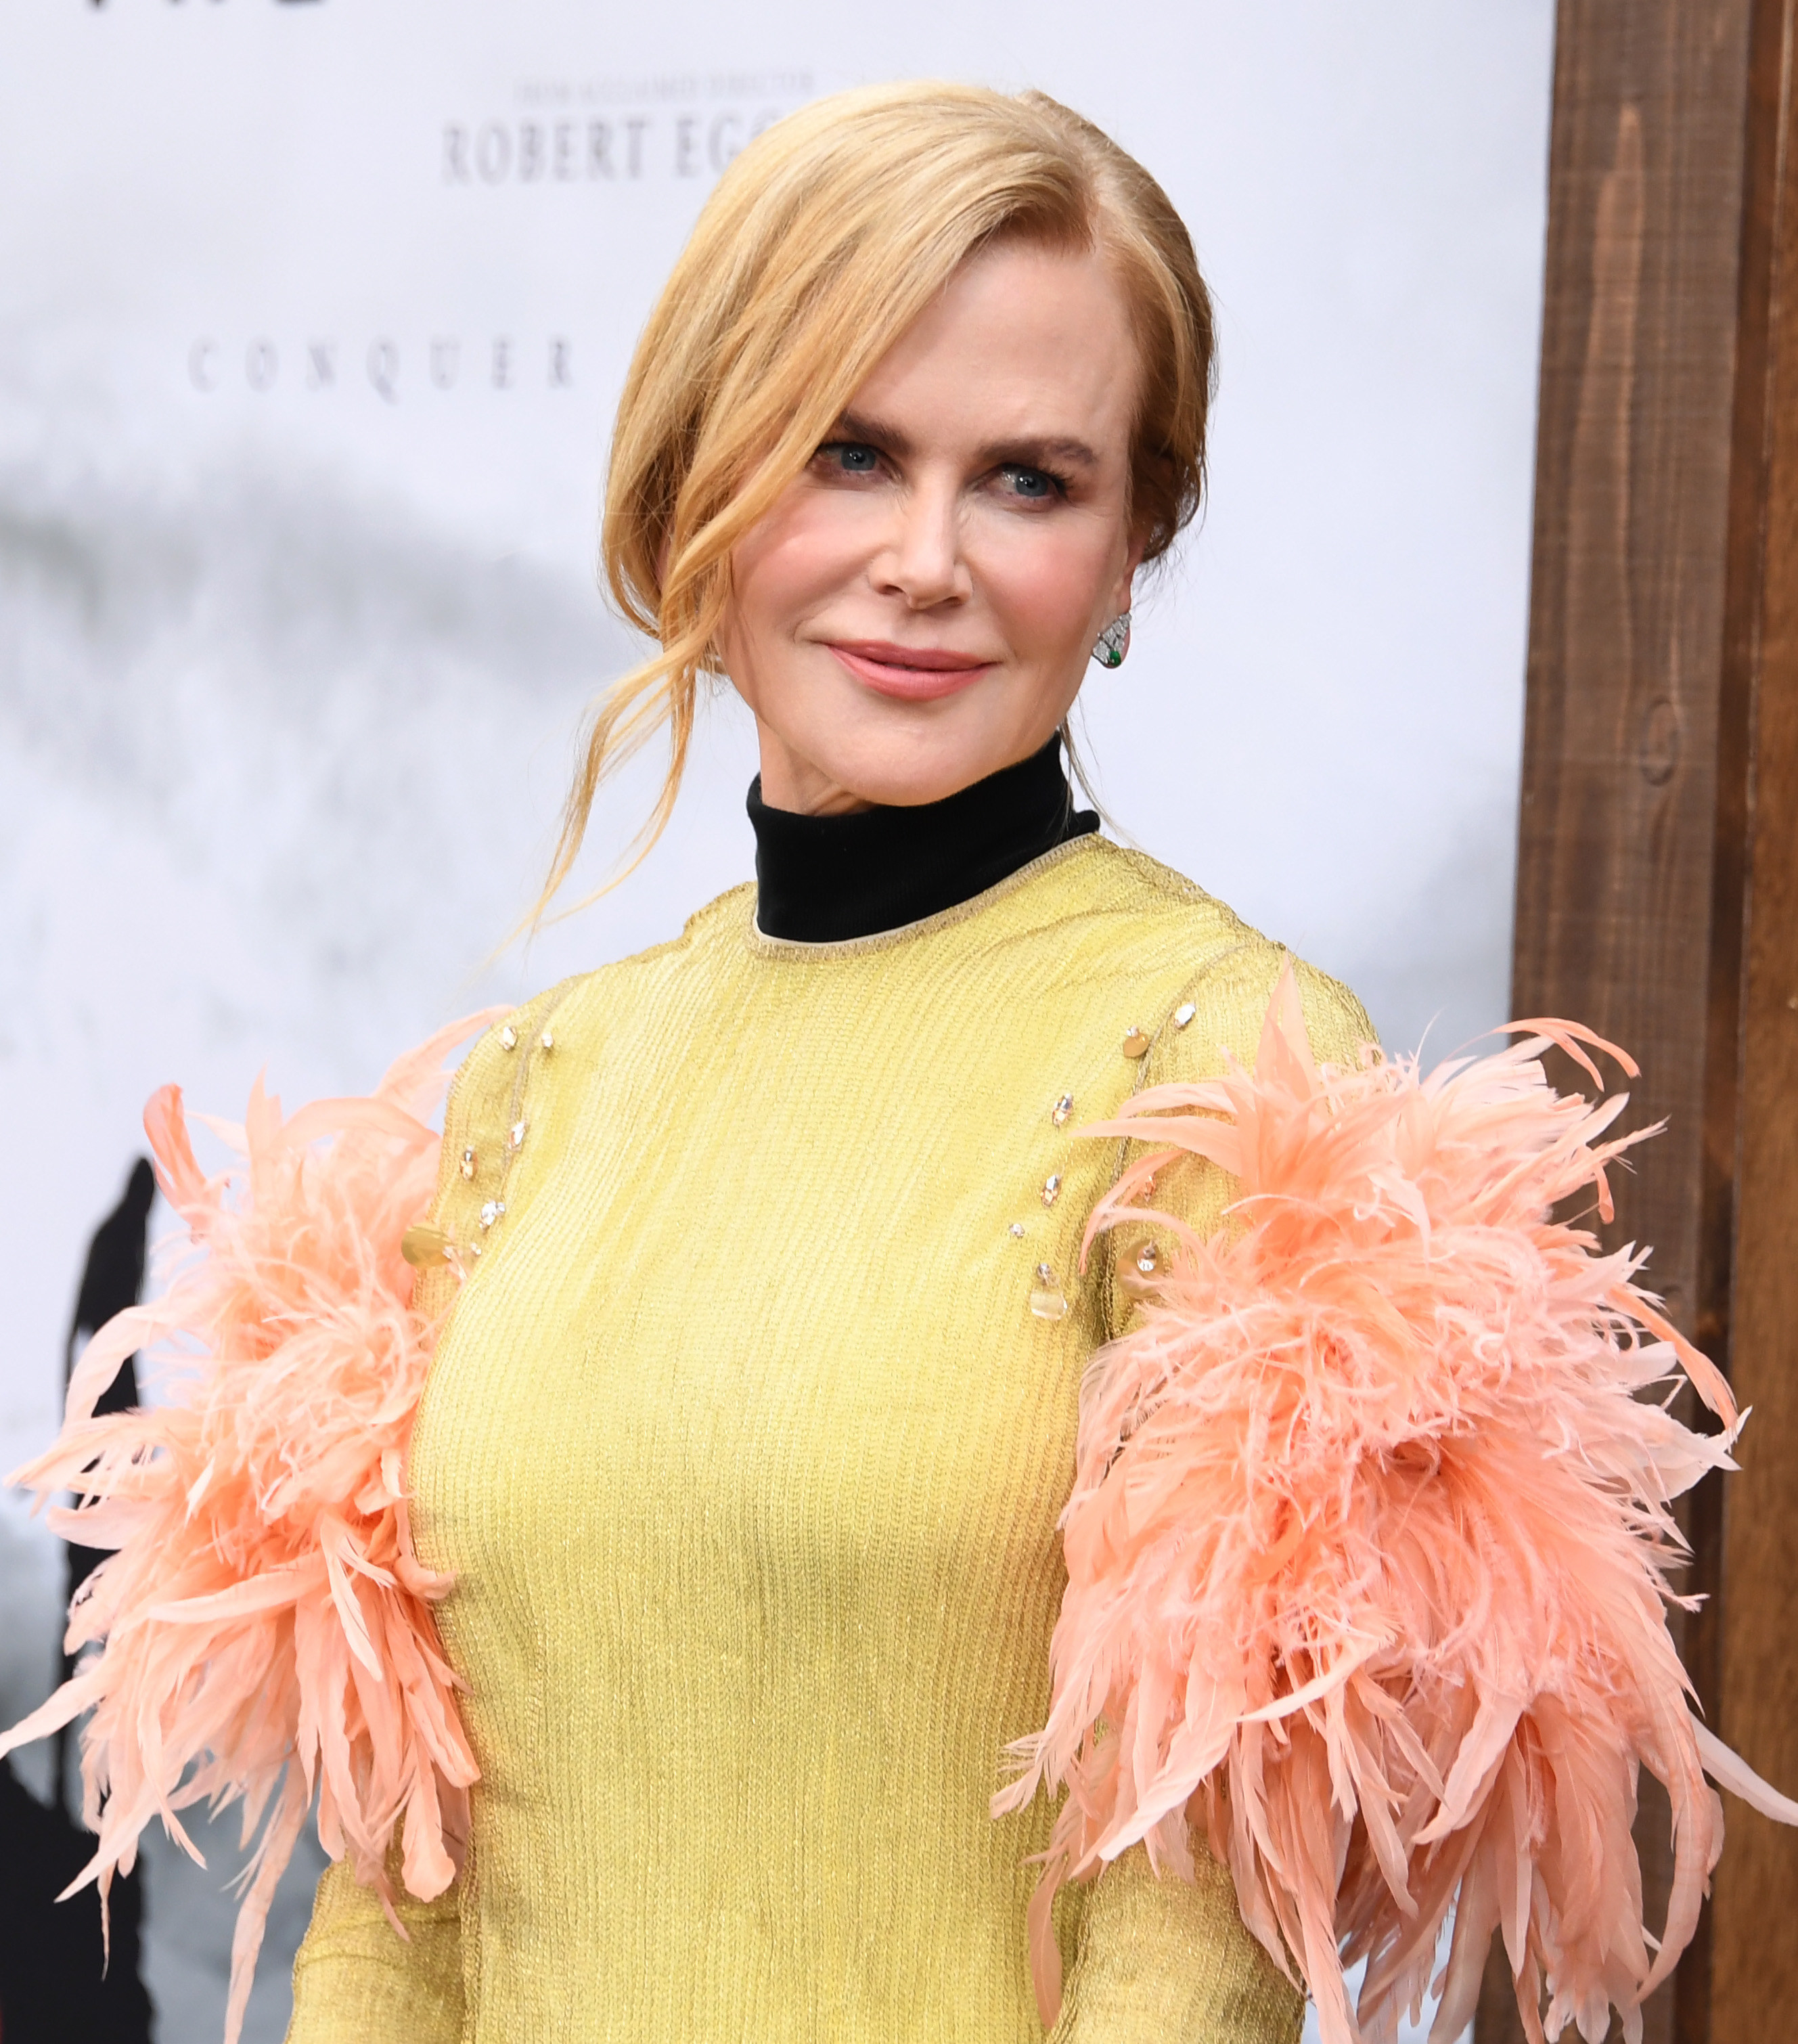 Nicole Kidman smiling at an event